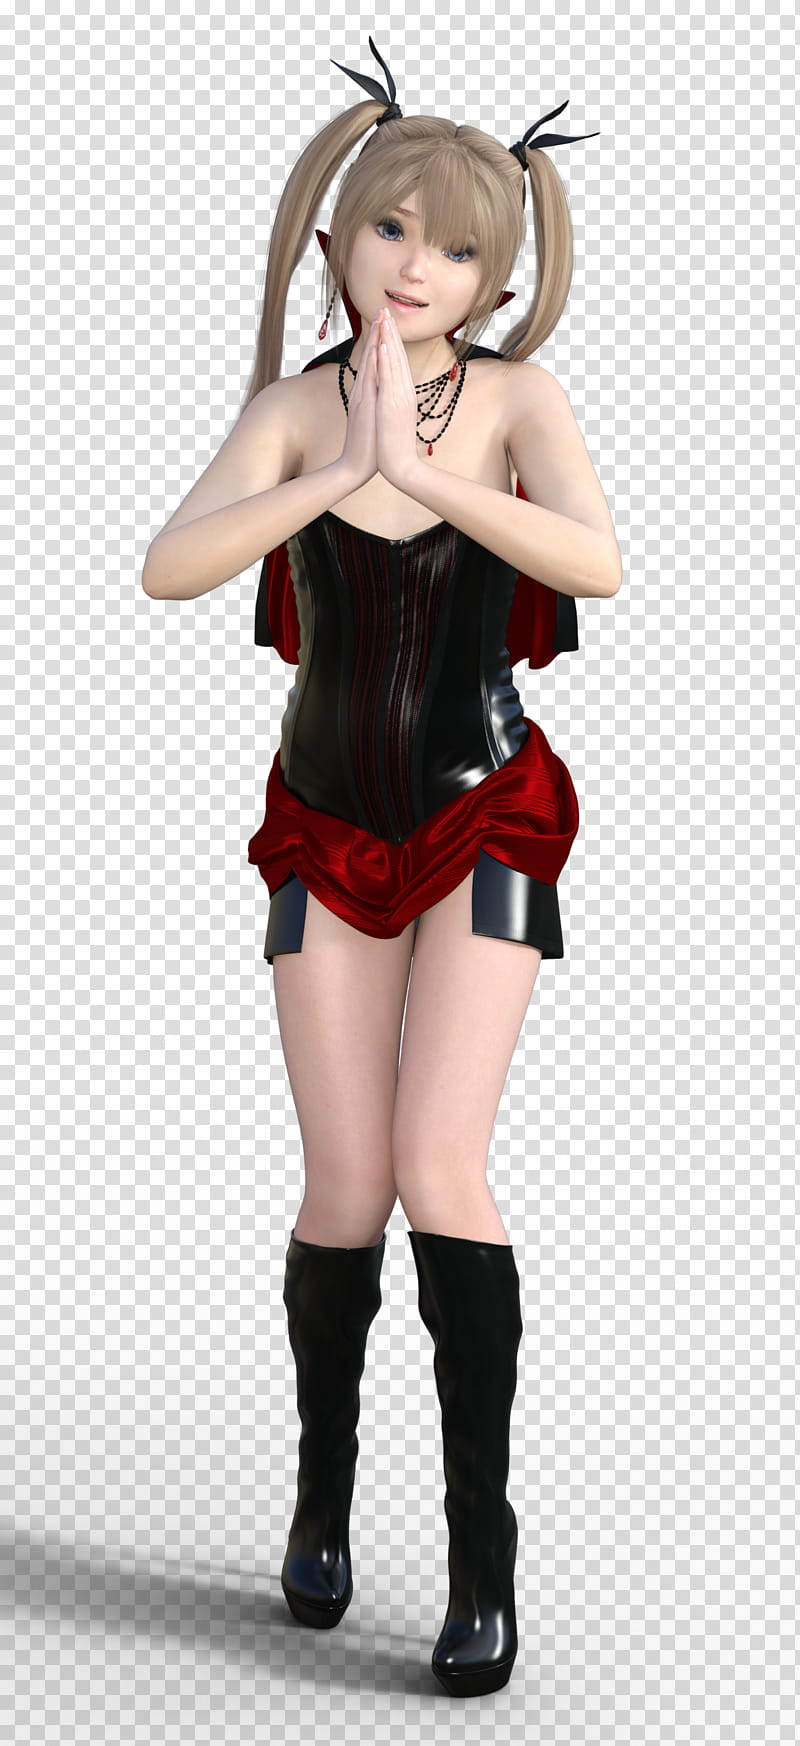 She Might Bite , girl anime character with black and red dress transparent background PNG clipart